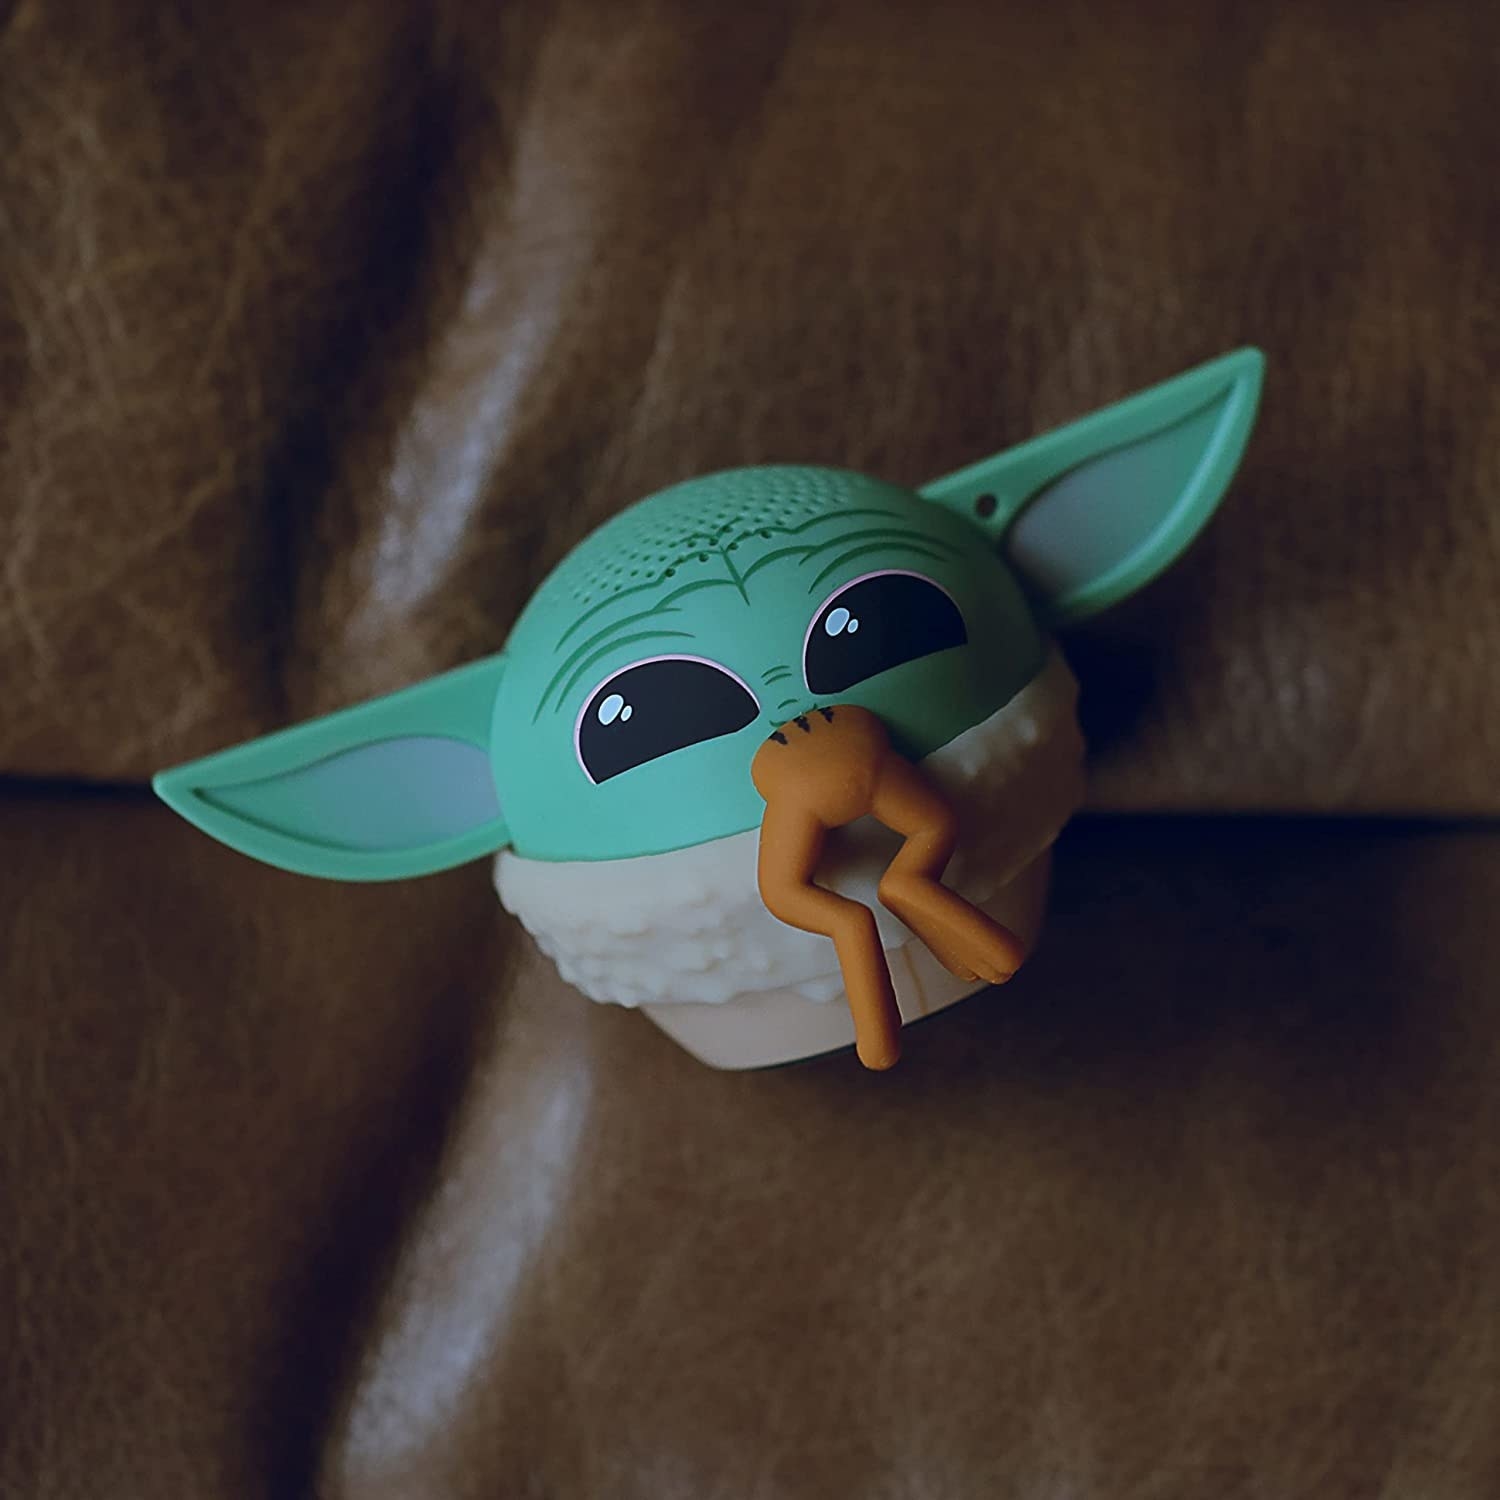 An image of the speaker designed to look like Baby Yoda eating a frog